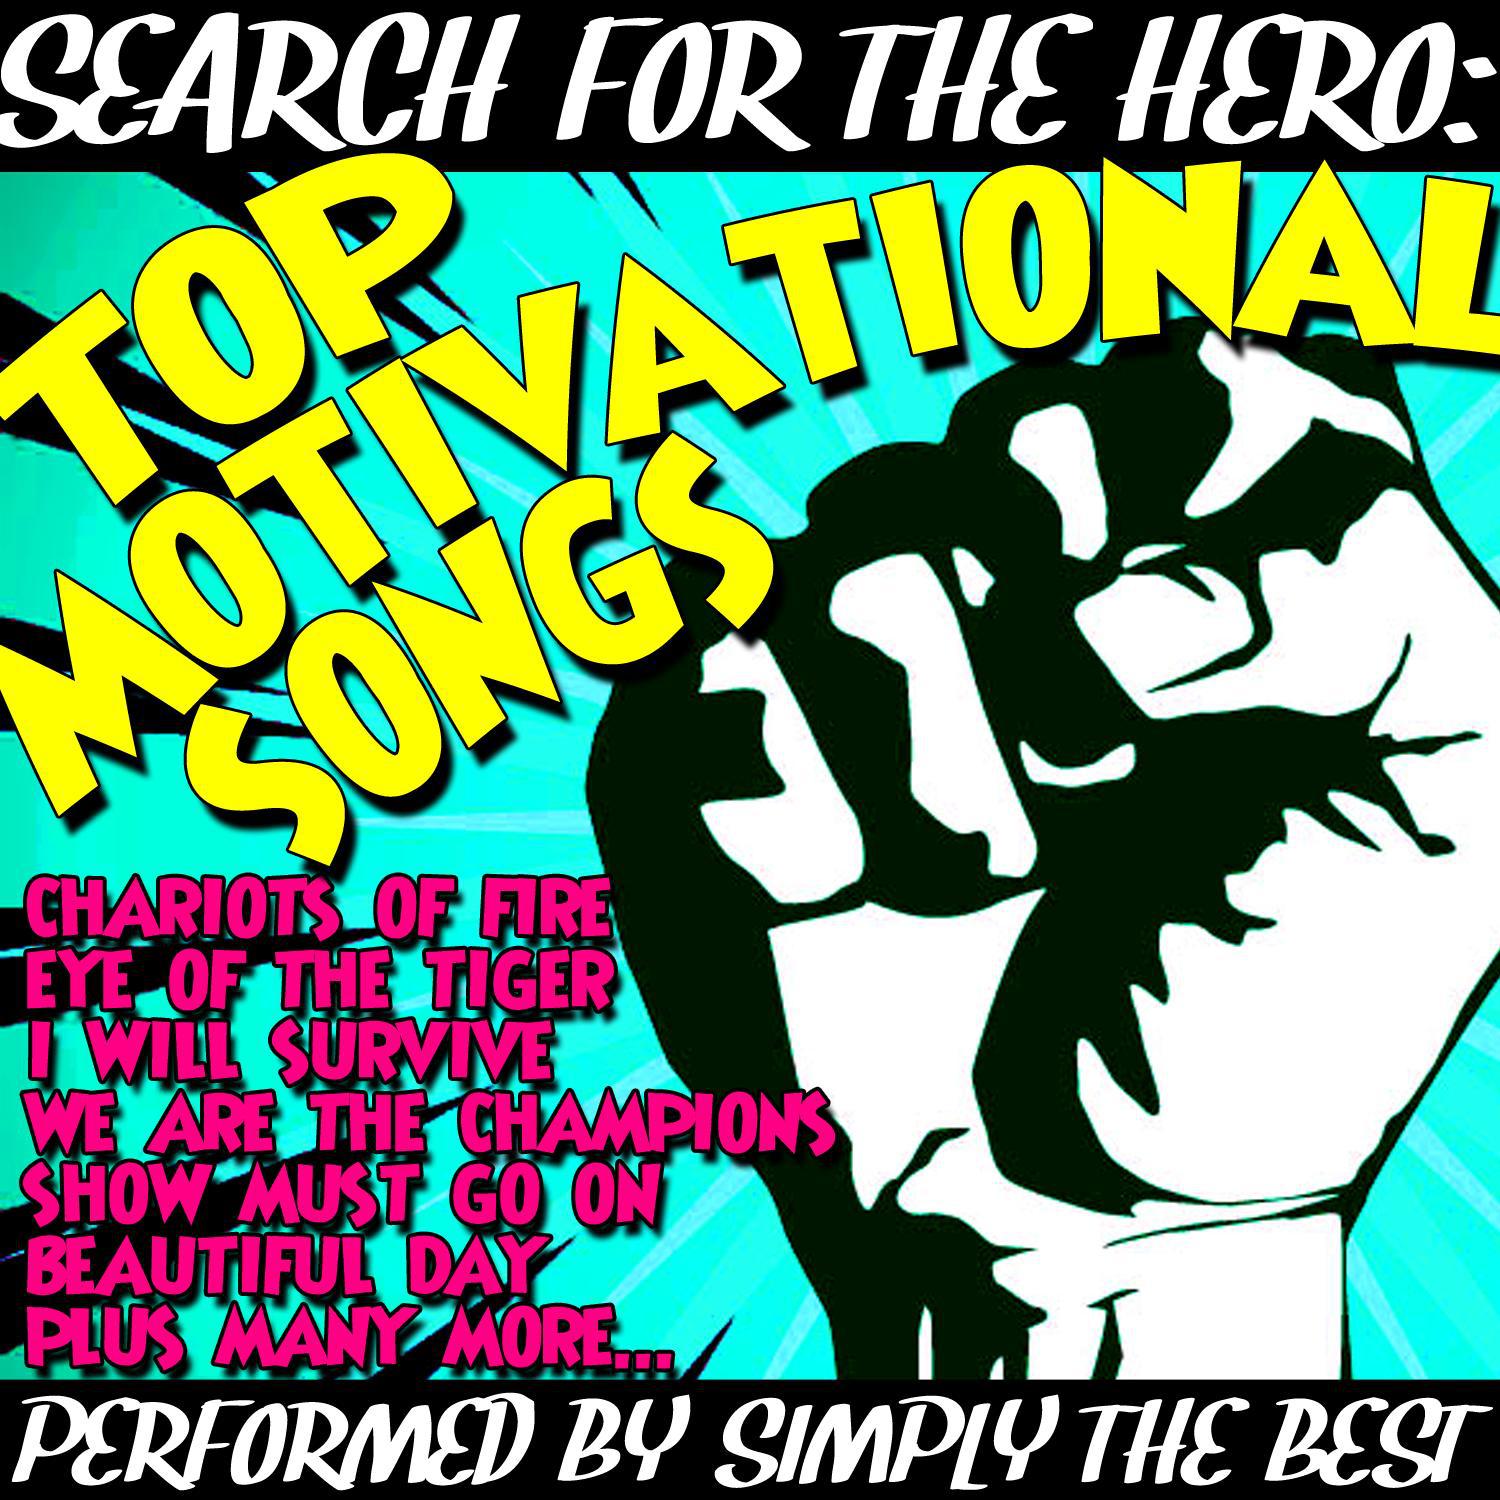 Search for the Hero: Top Motivational Songs